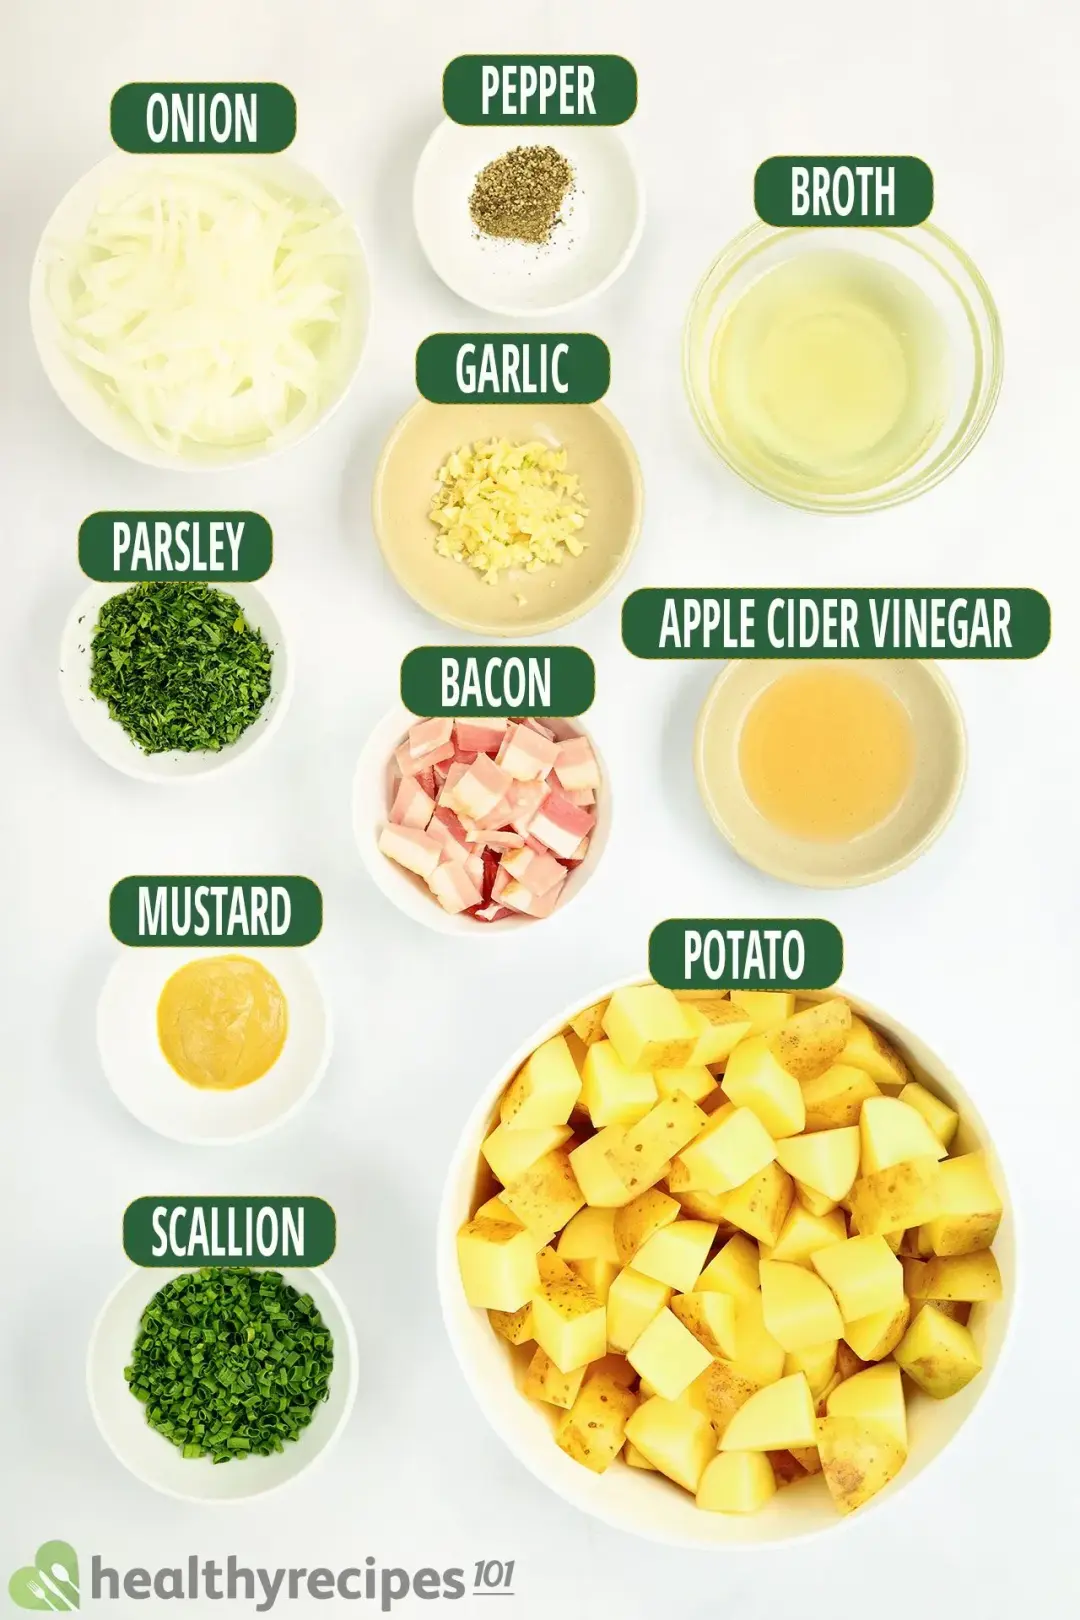 Ingredients for Our German Potato Salad Recipe